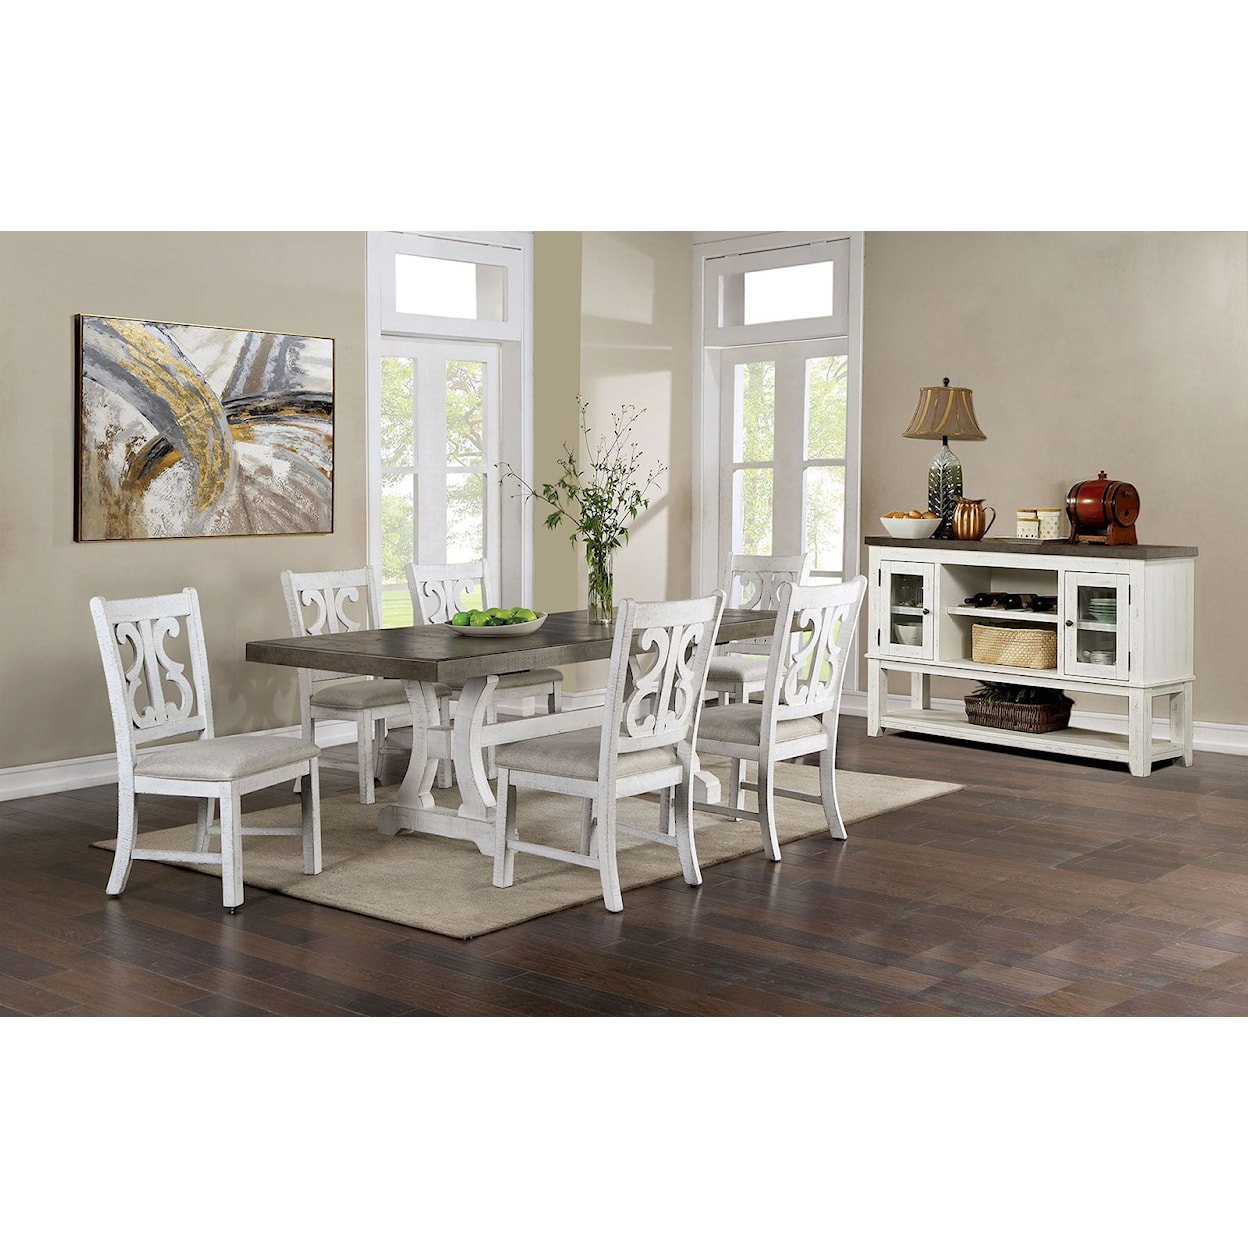 Furniture of America Auletta 7 Pc. Dining Table Set